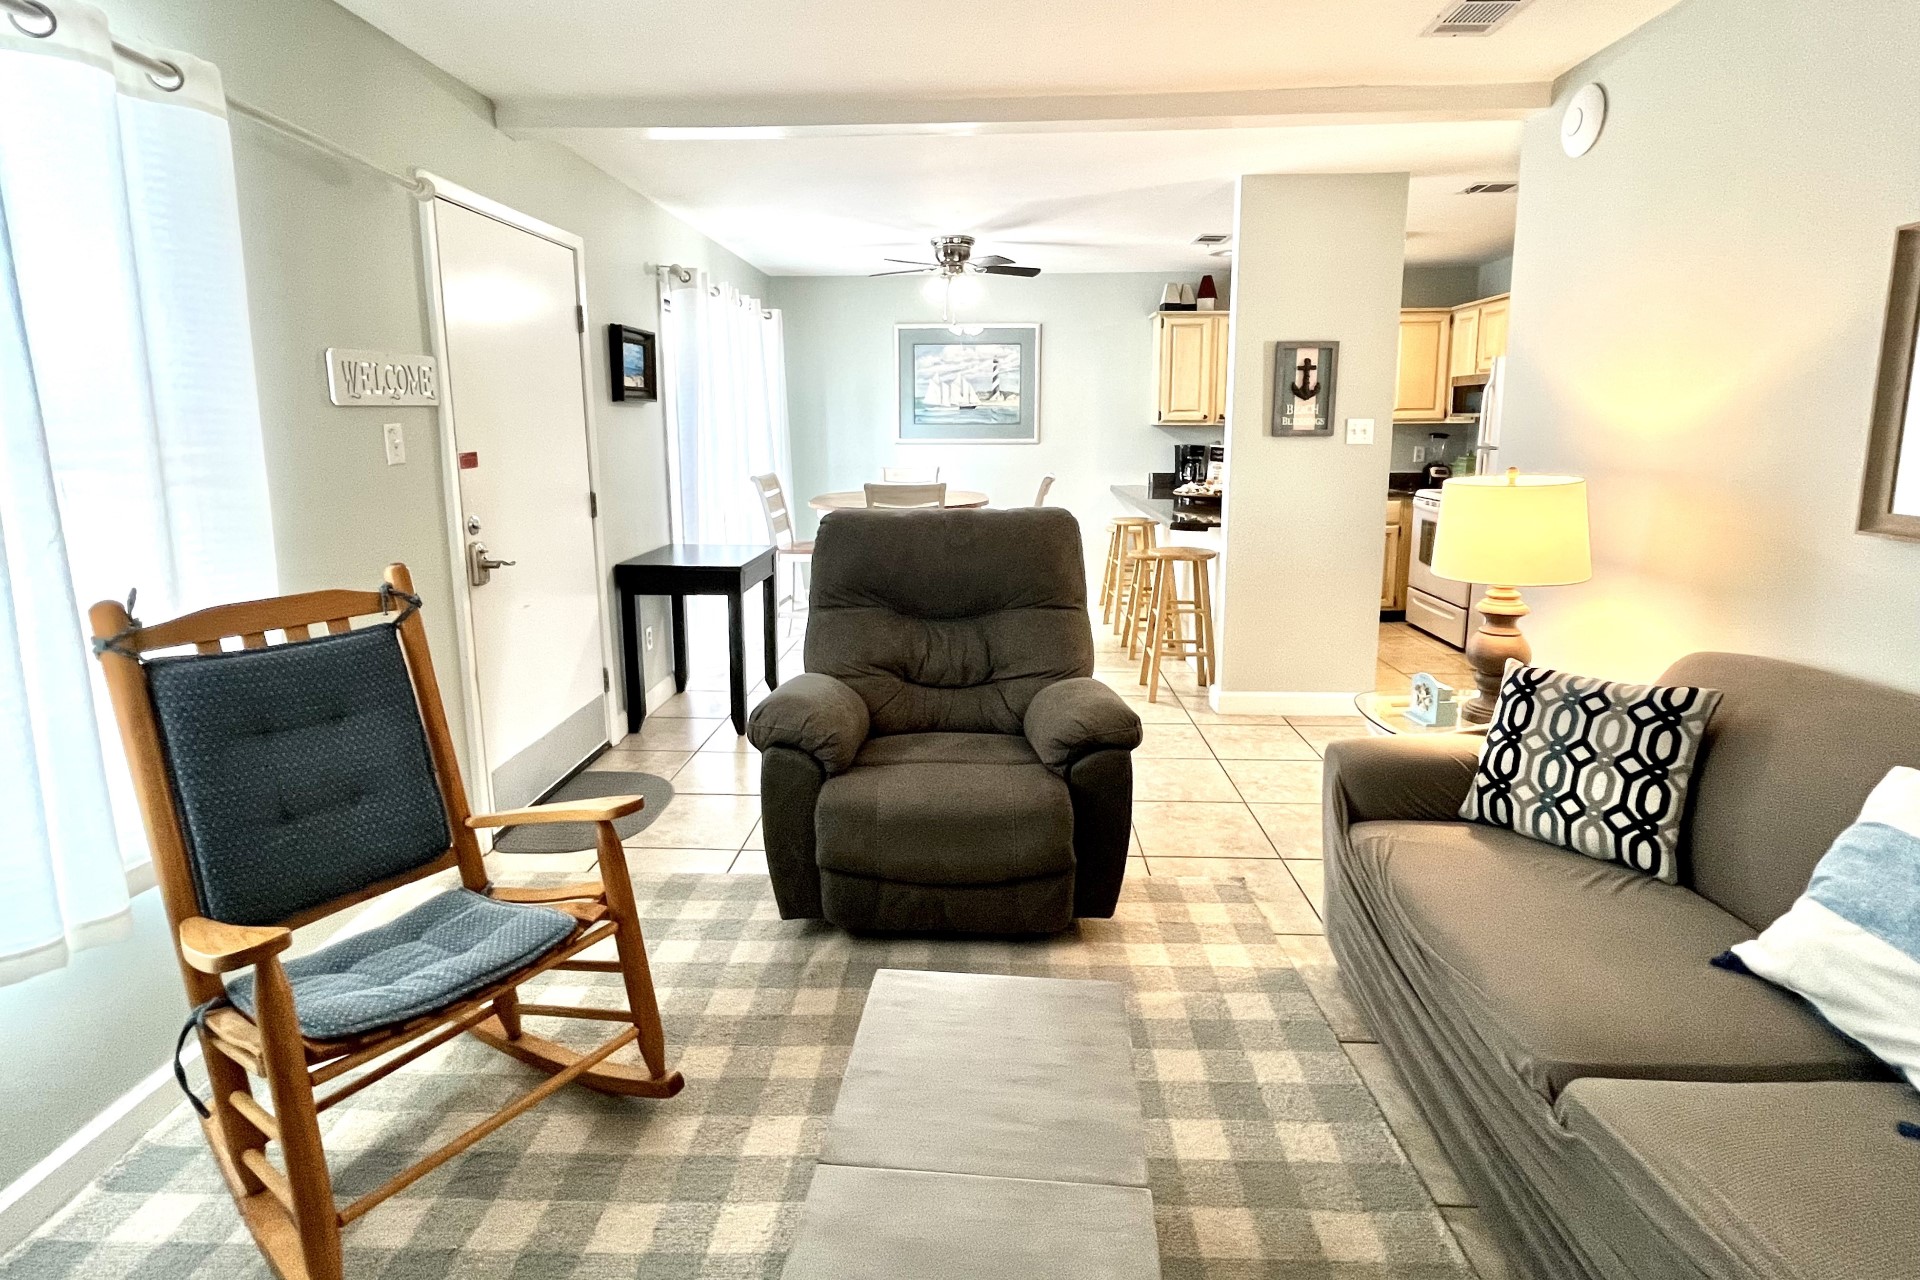 Cozy living area with new sleeper sofa and two side chairs.